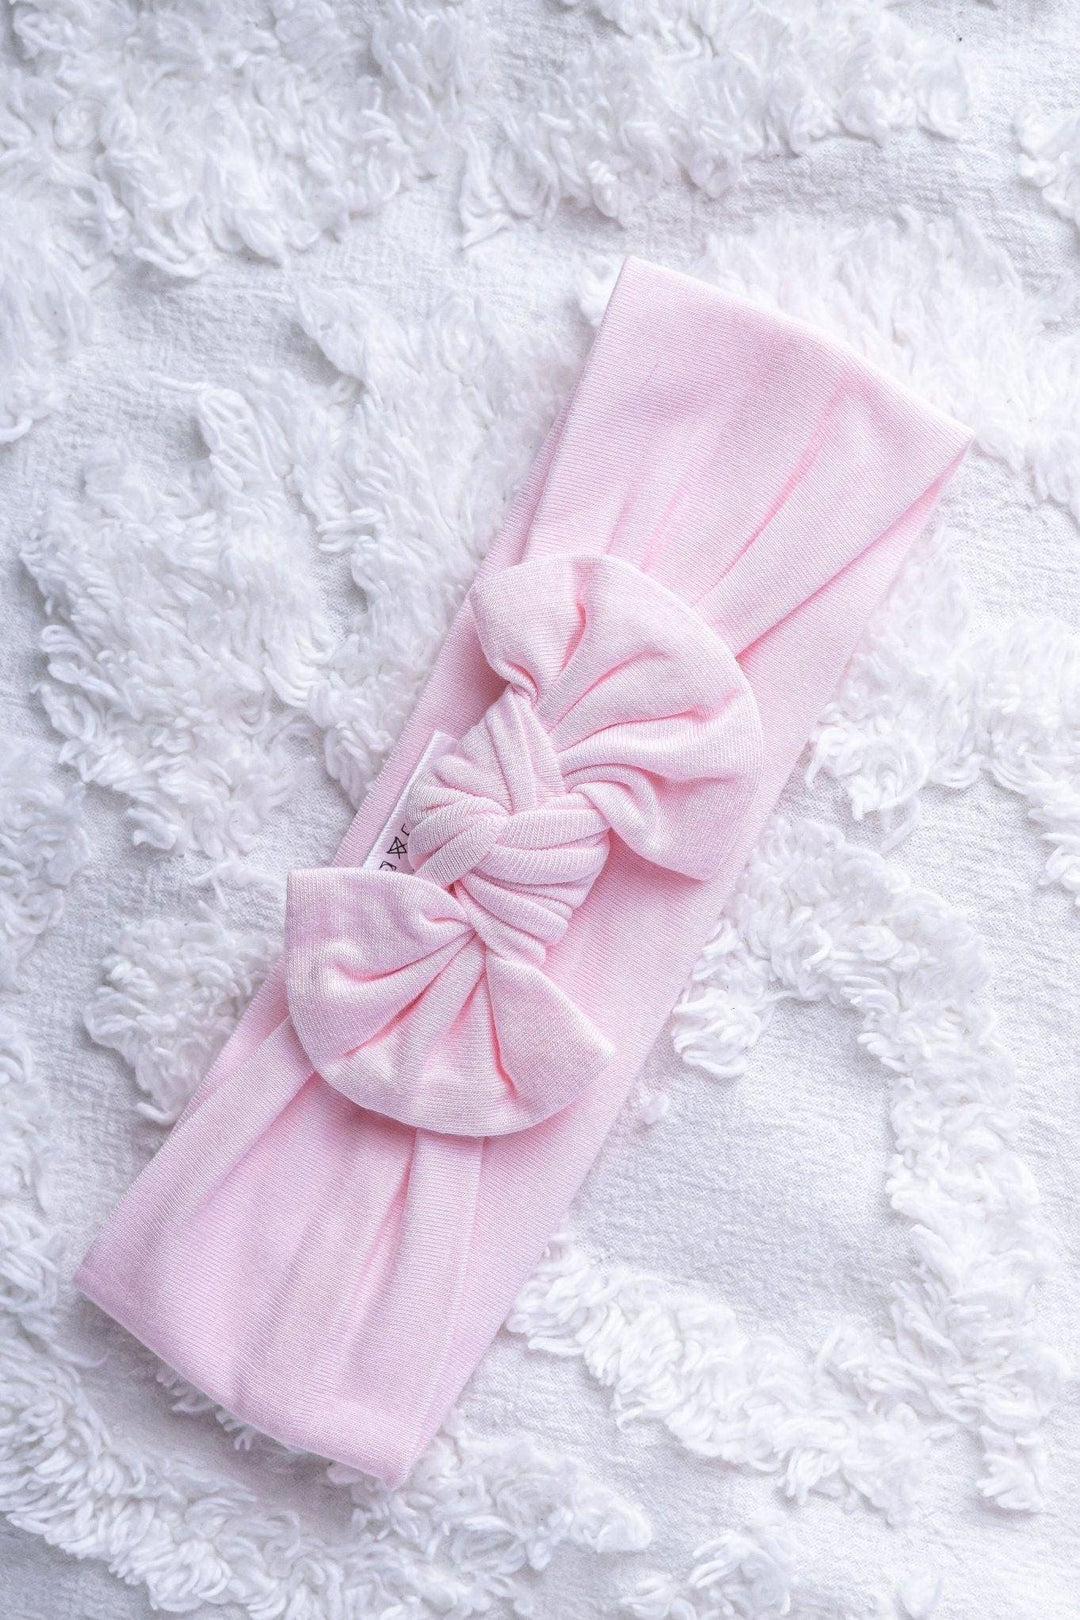 Baby pink stretchy bamboo knotted how much are headbands here cute headband